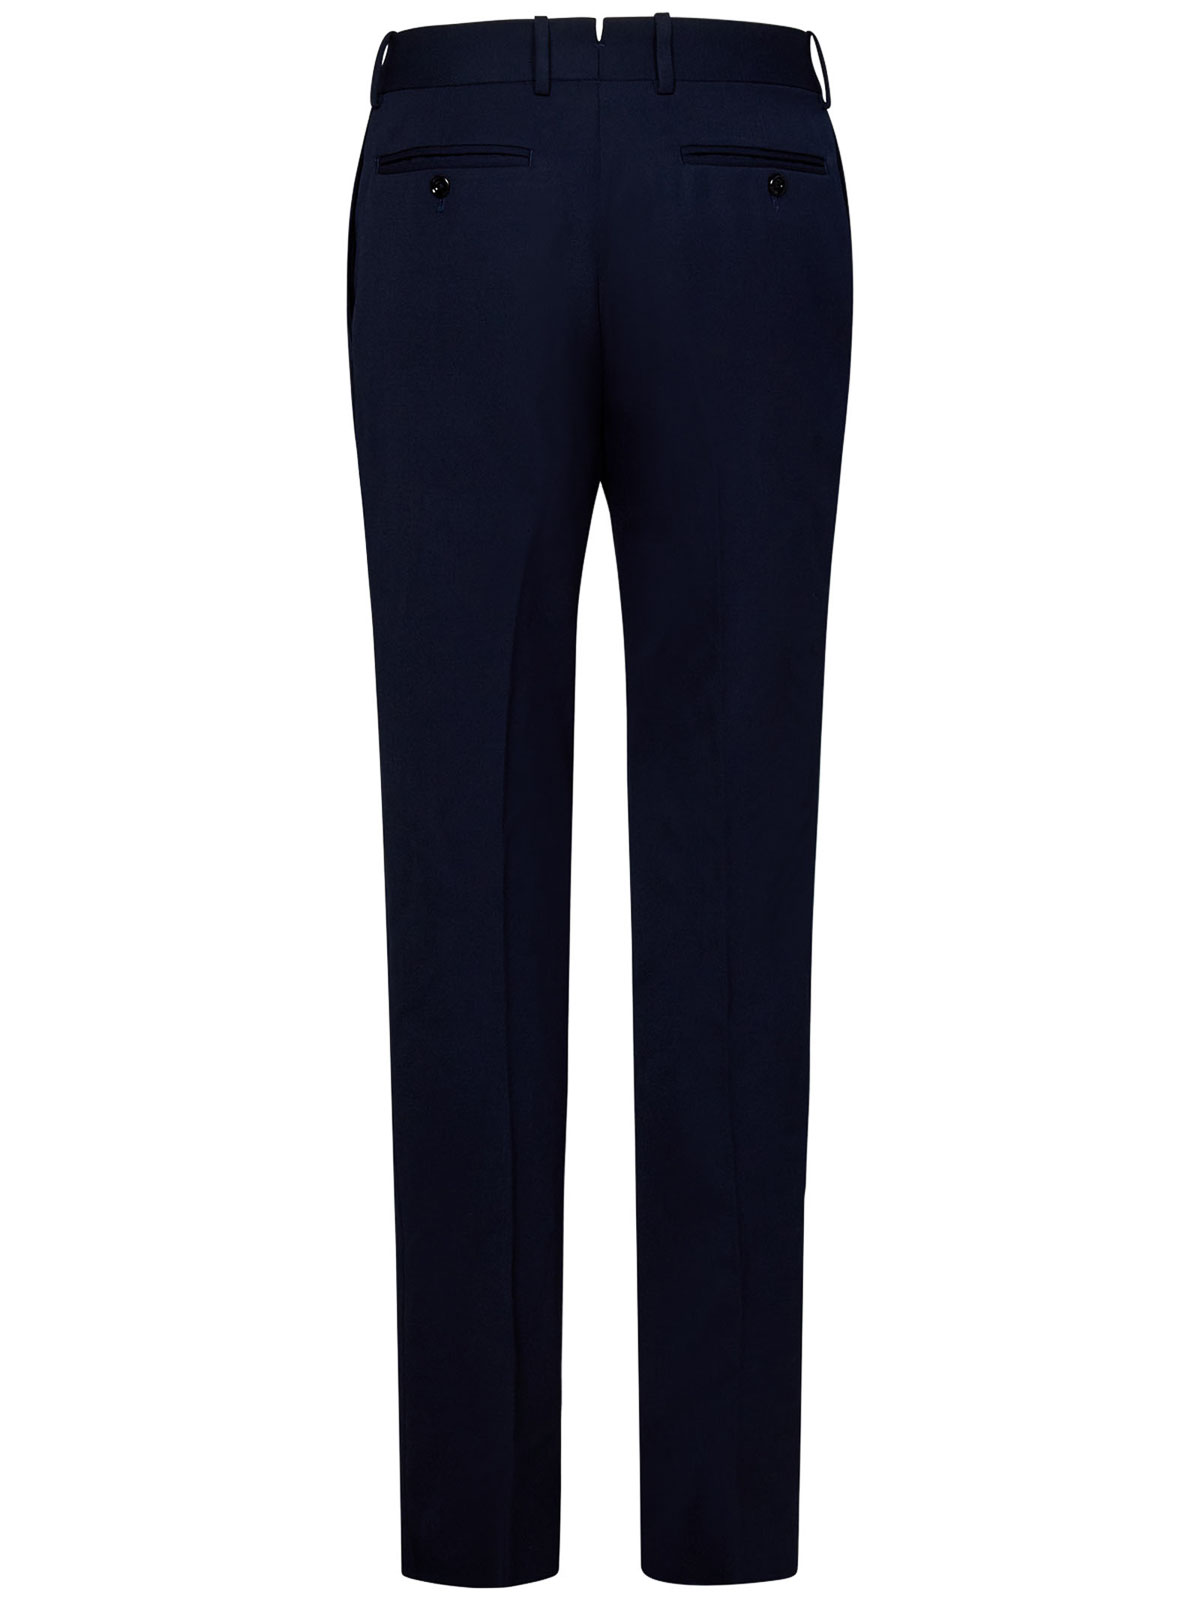 Navy Blue Tailored Cigarette Trousers